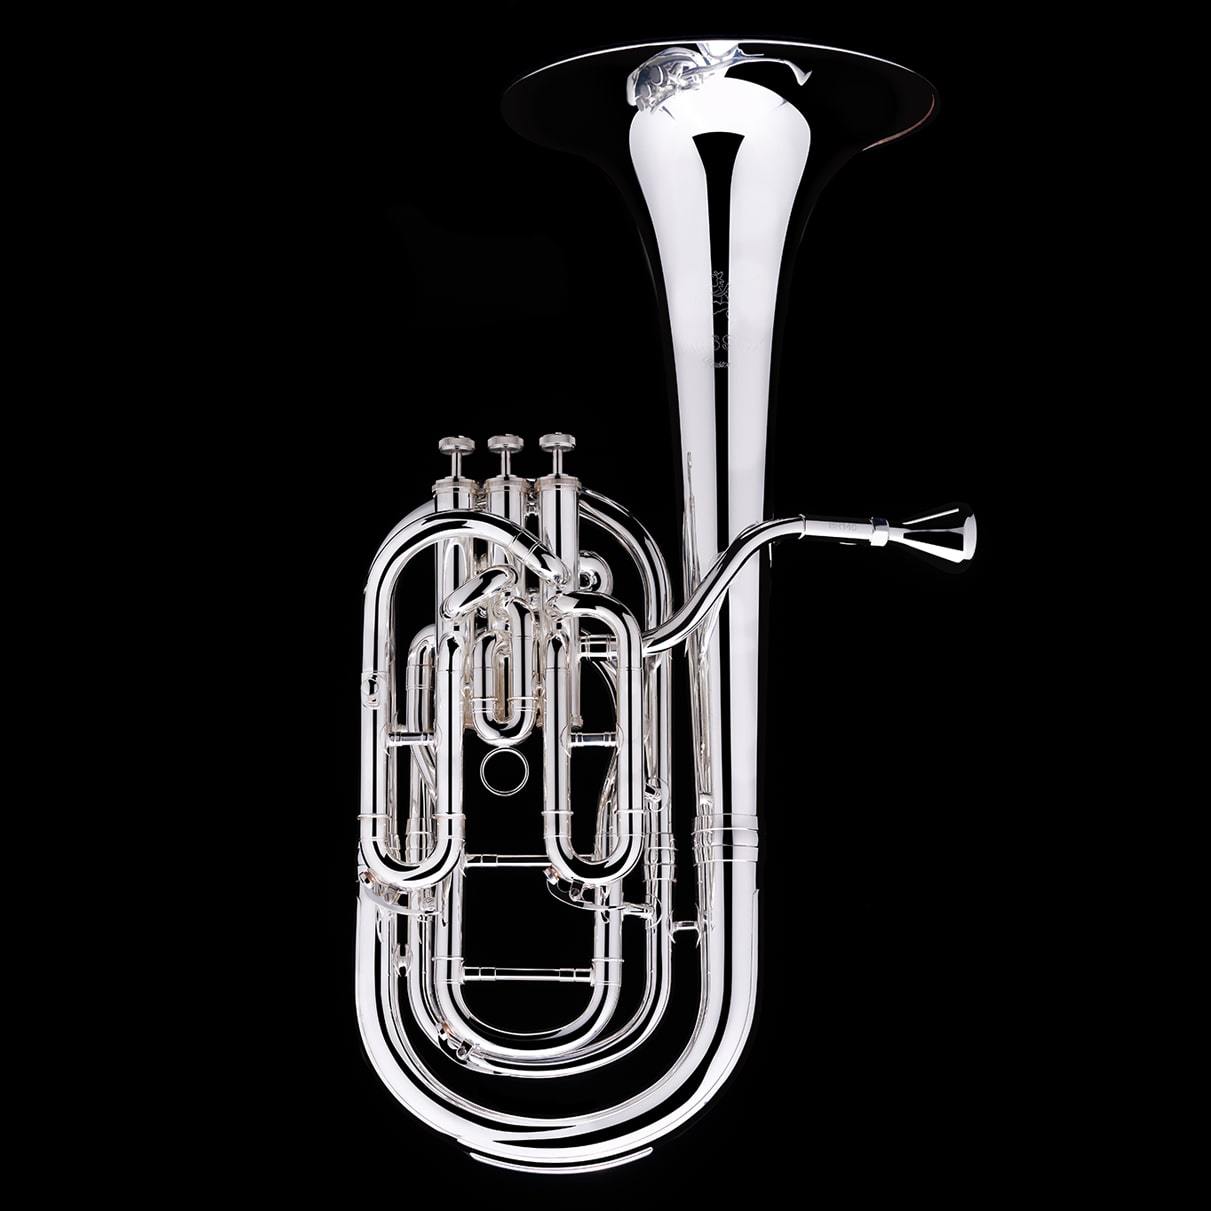 An image of a Bb Compensated Baritone (3-valve) from Wessex Tubas in silver-plate